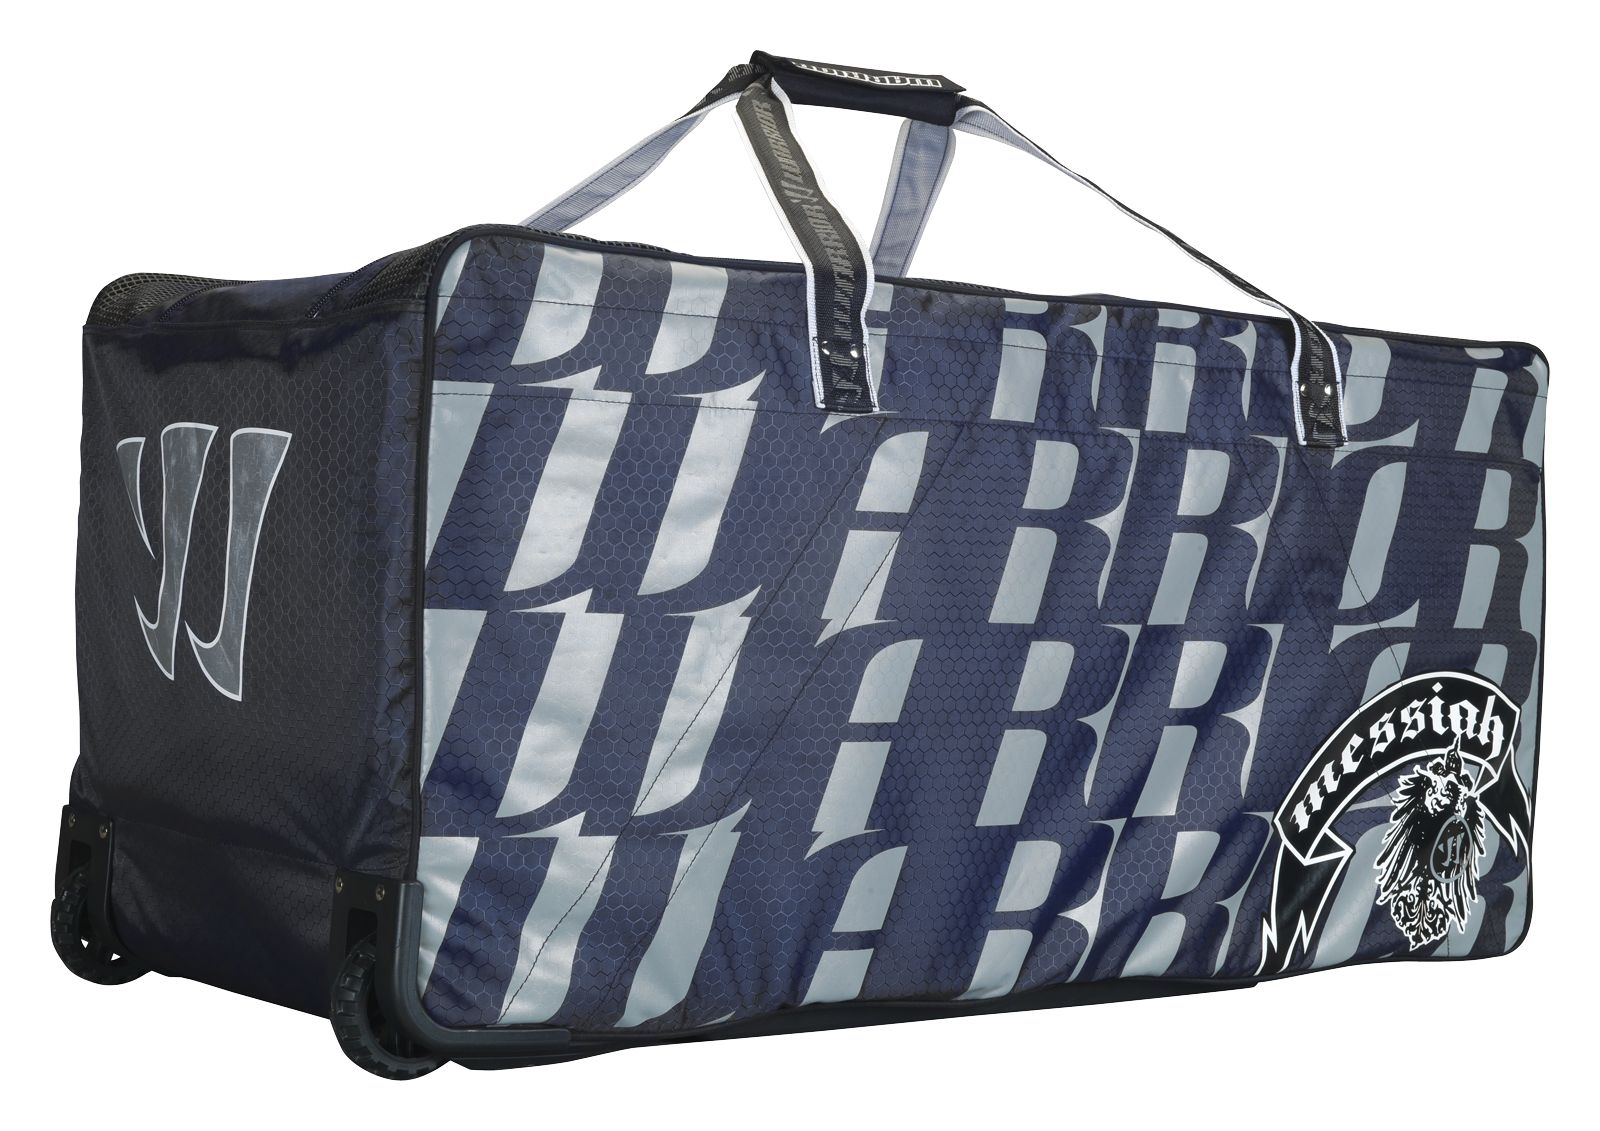 Messiah Goalie Wheel Bag, Navy with White image number 1